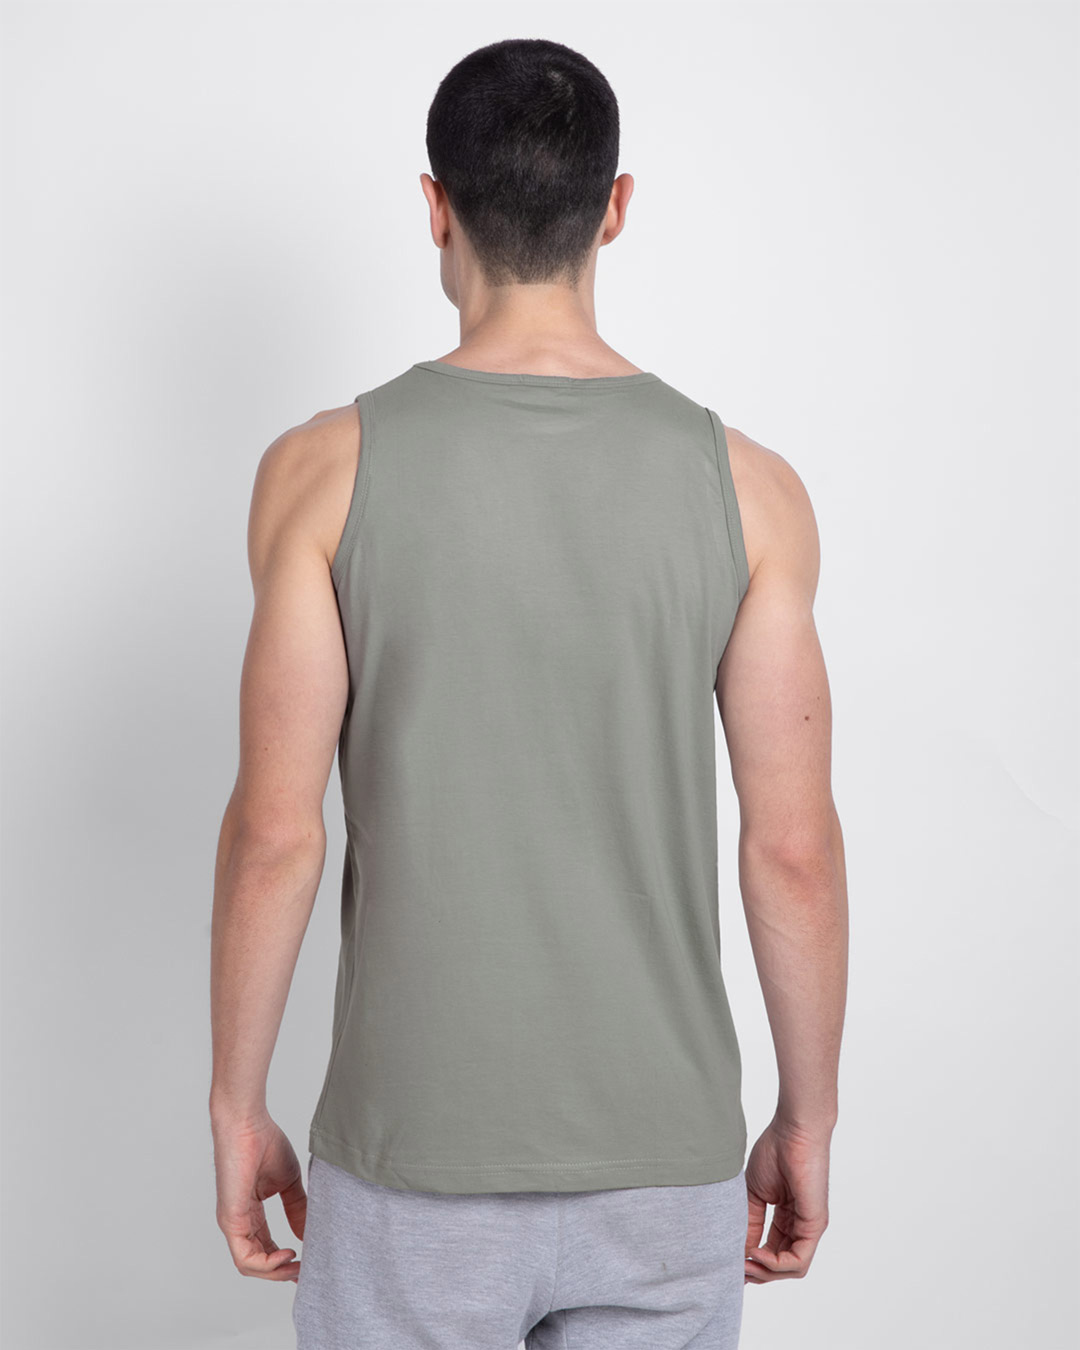 Shop With a Plan Round Neck Vest Meteor Grey-Back